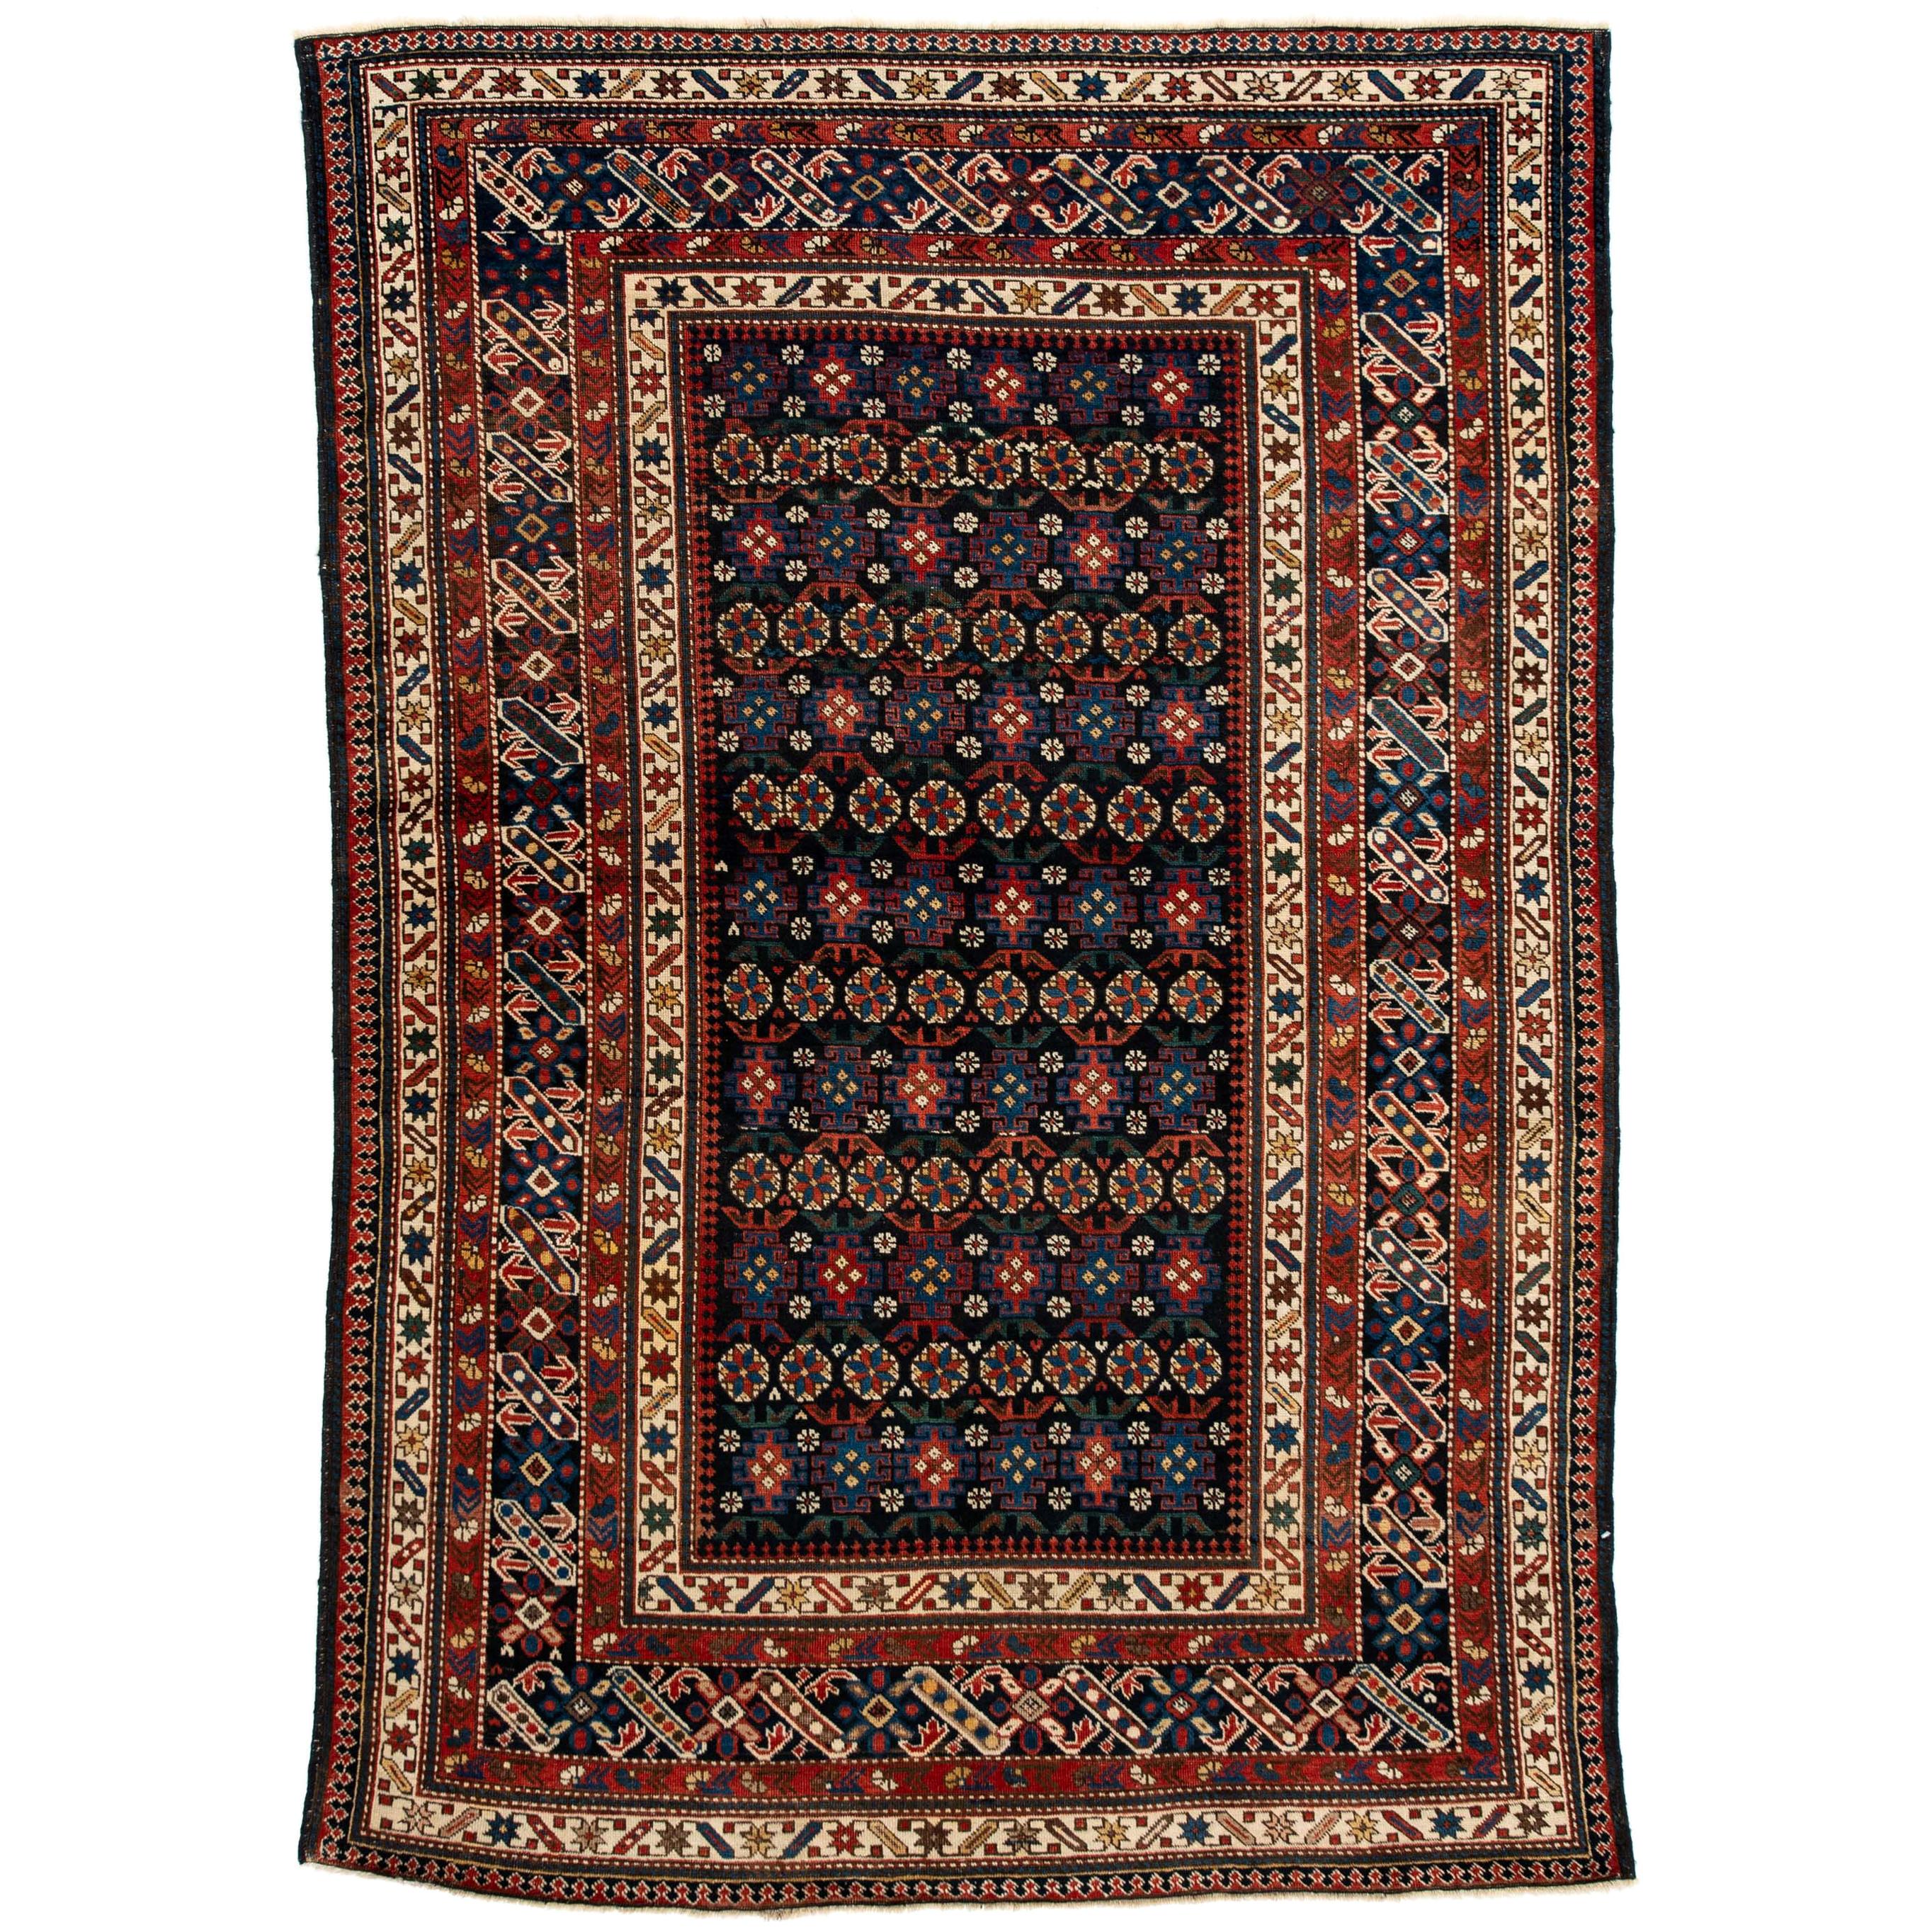 Antique Caucasian Chi-Chi Kuba Decorative Rug in Navy, Coral, Green and Yellow